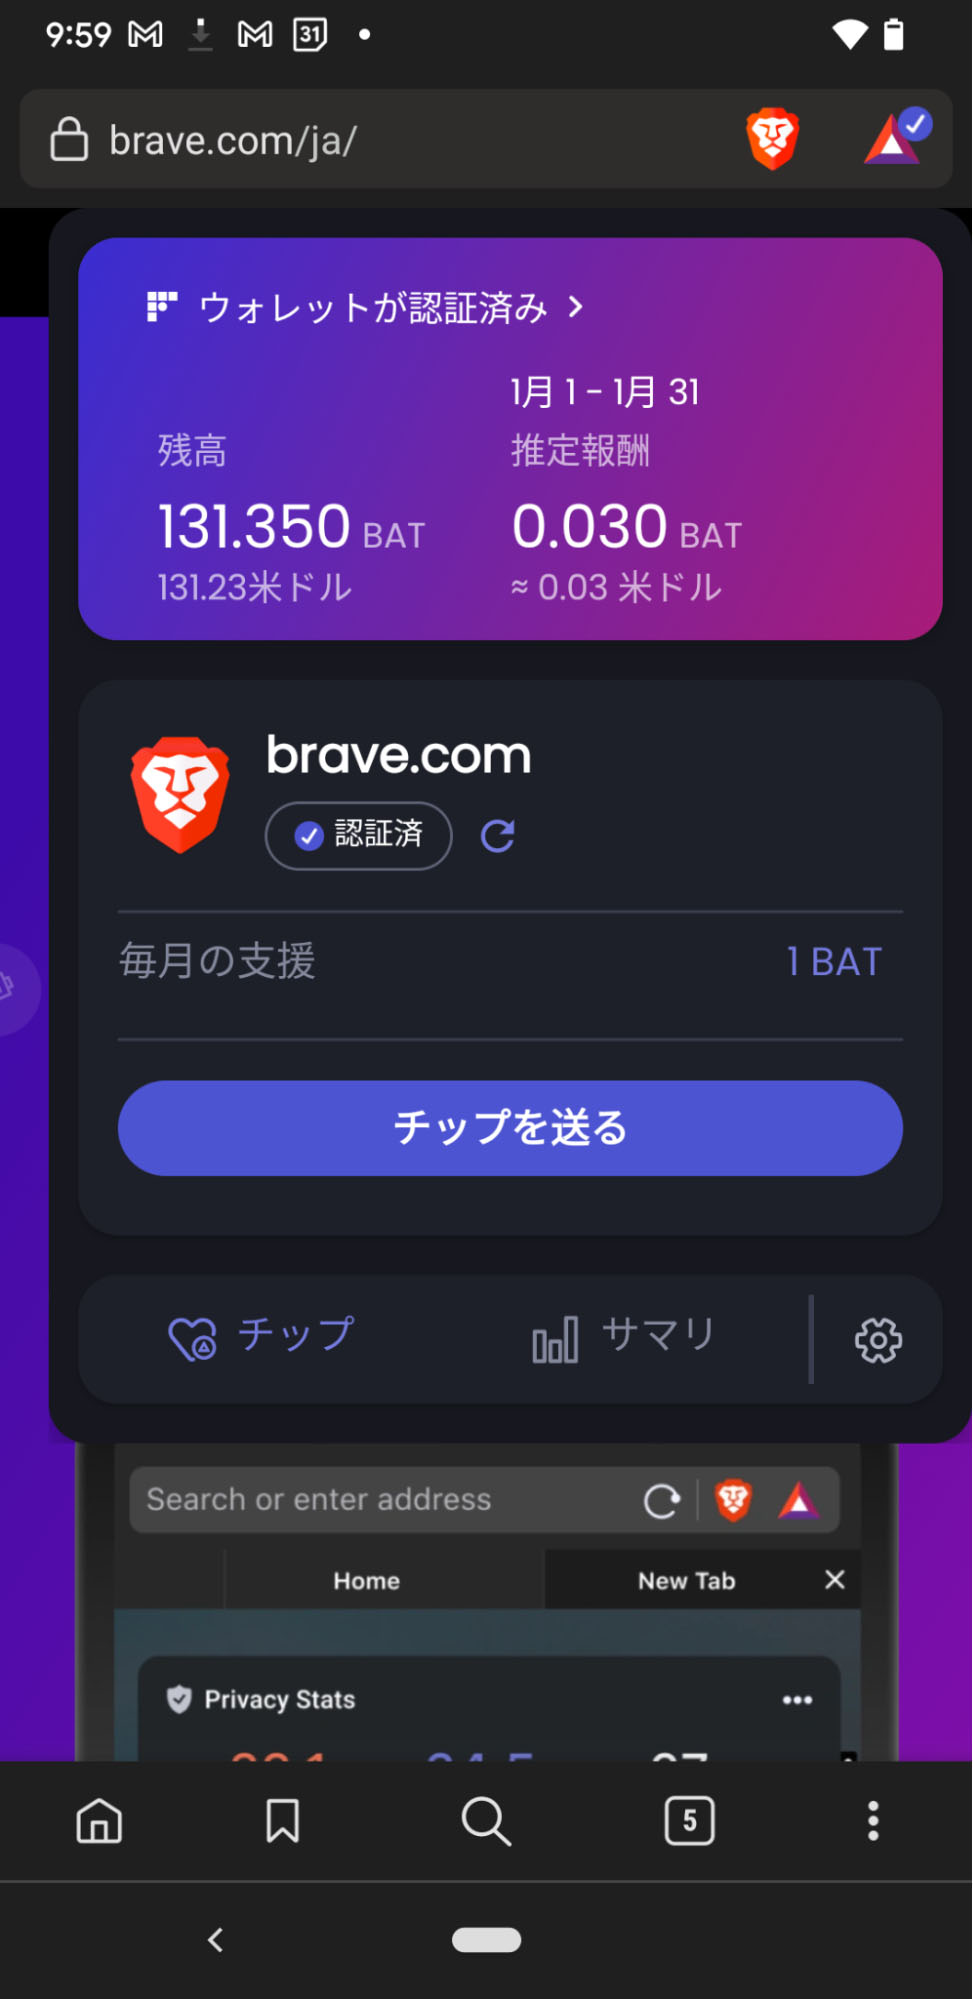 Announcing bitFlyer integration for Brave Rewards Android Users in Japan